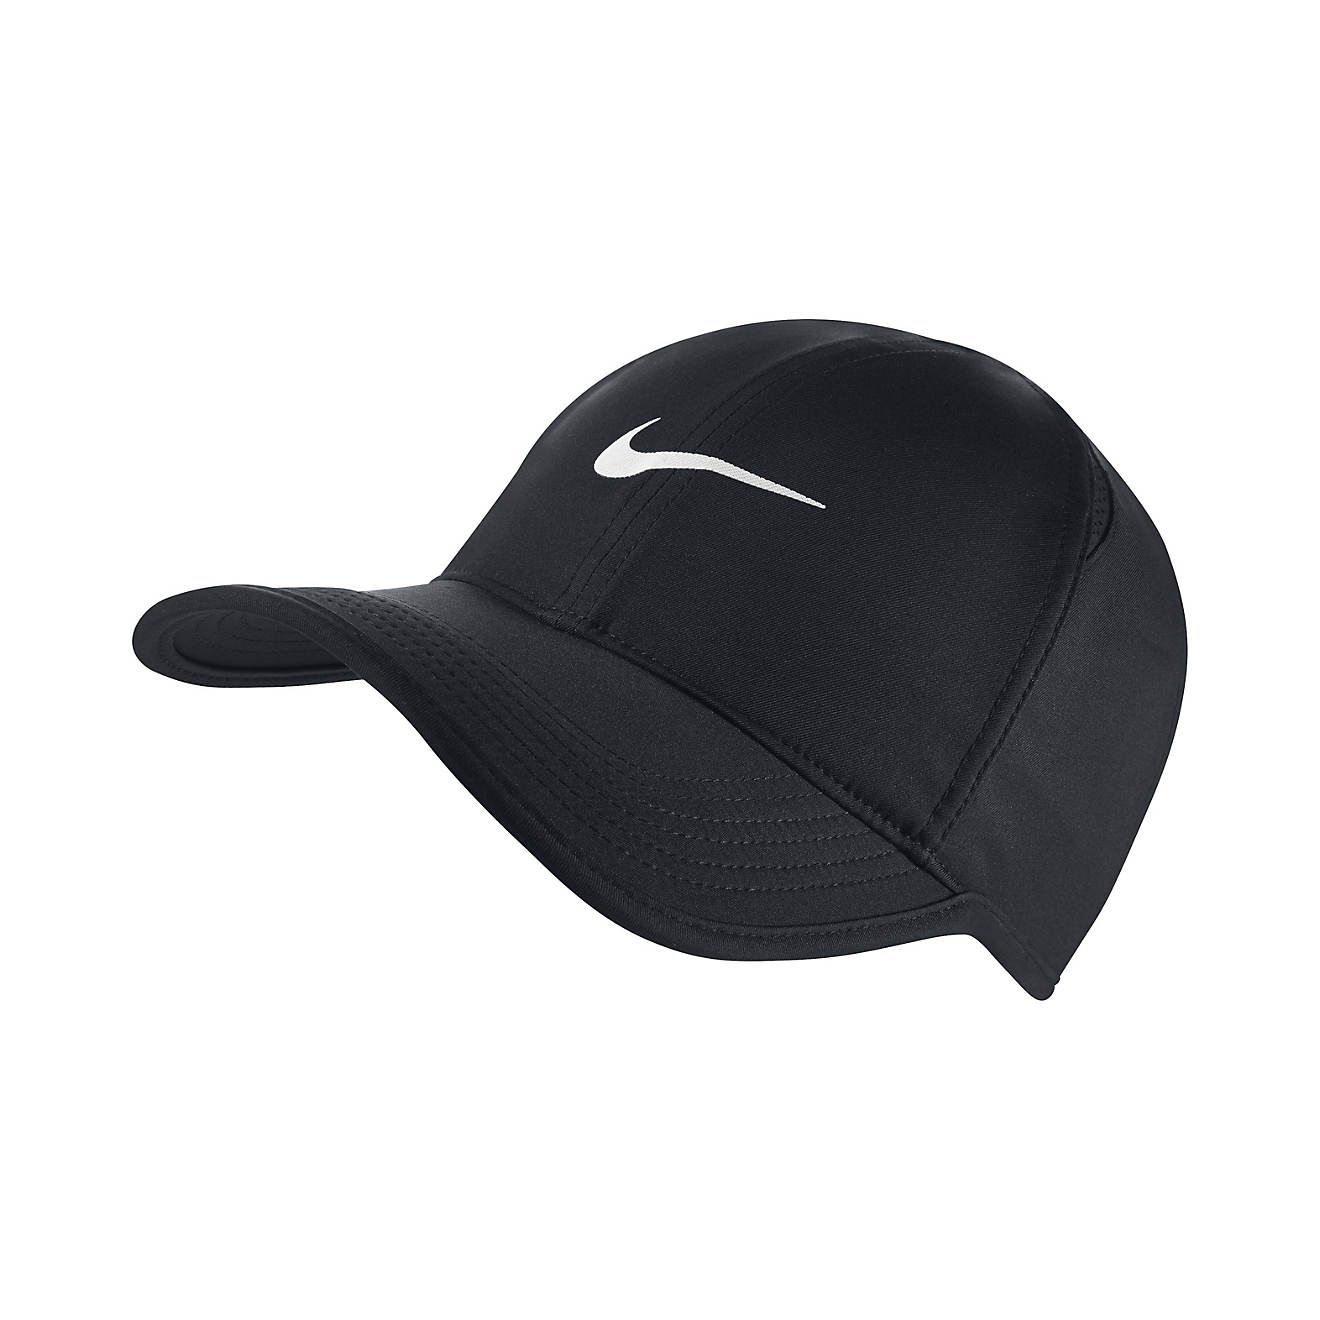 Nike Adults' Featherlight Cap | Academy Sports + Outdoors